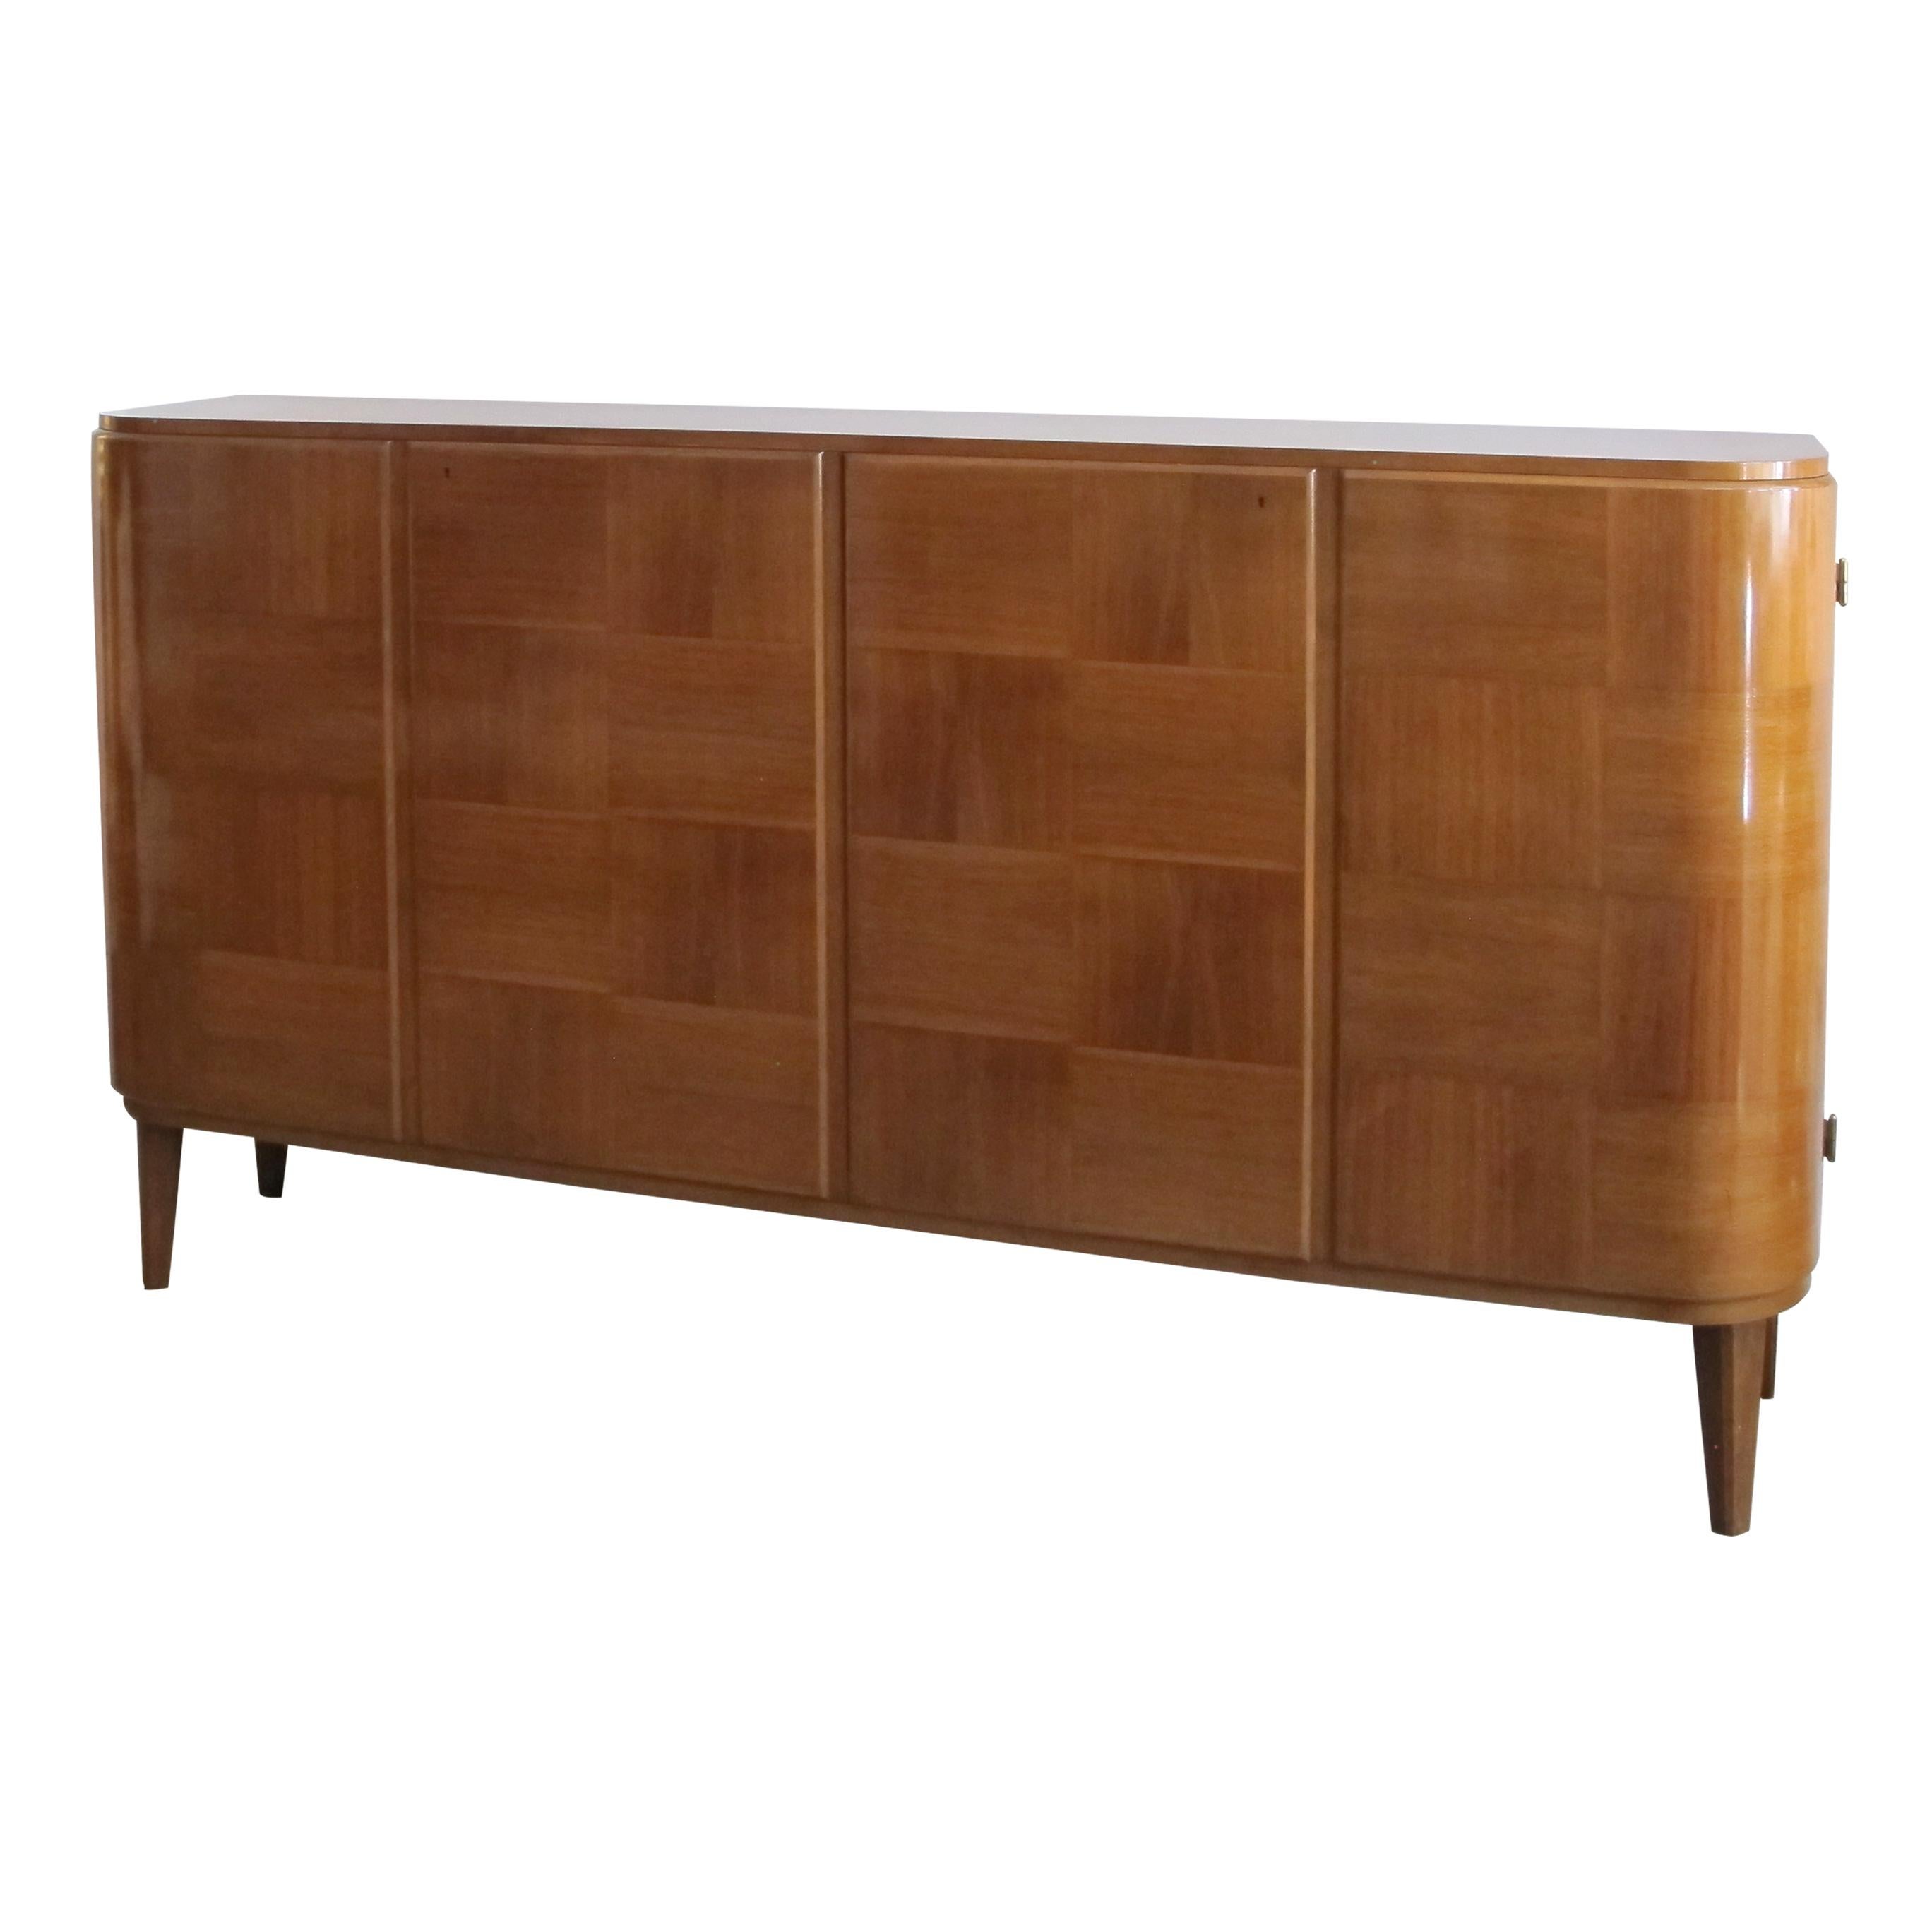 Mid-Century Modern 1930s/40s Art Deco Rare Sideboard with Curved edges by Carl Axel Acking 